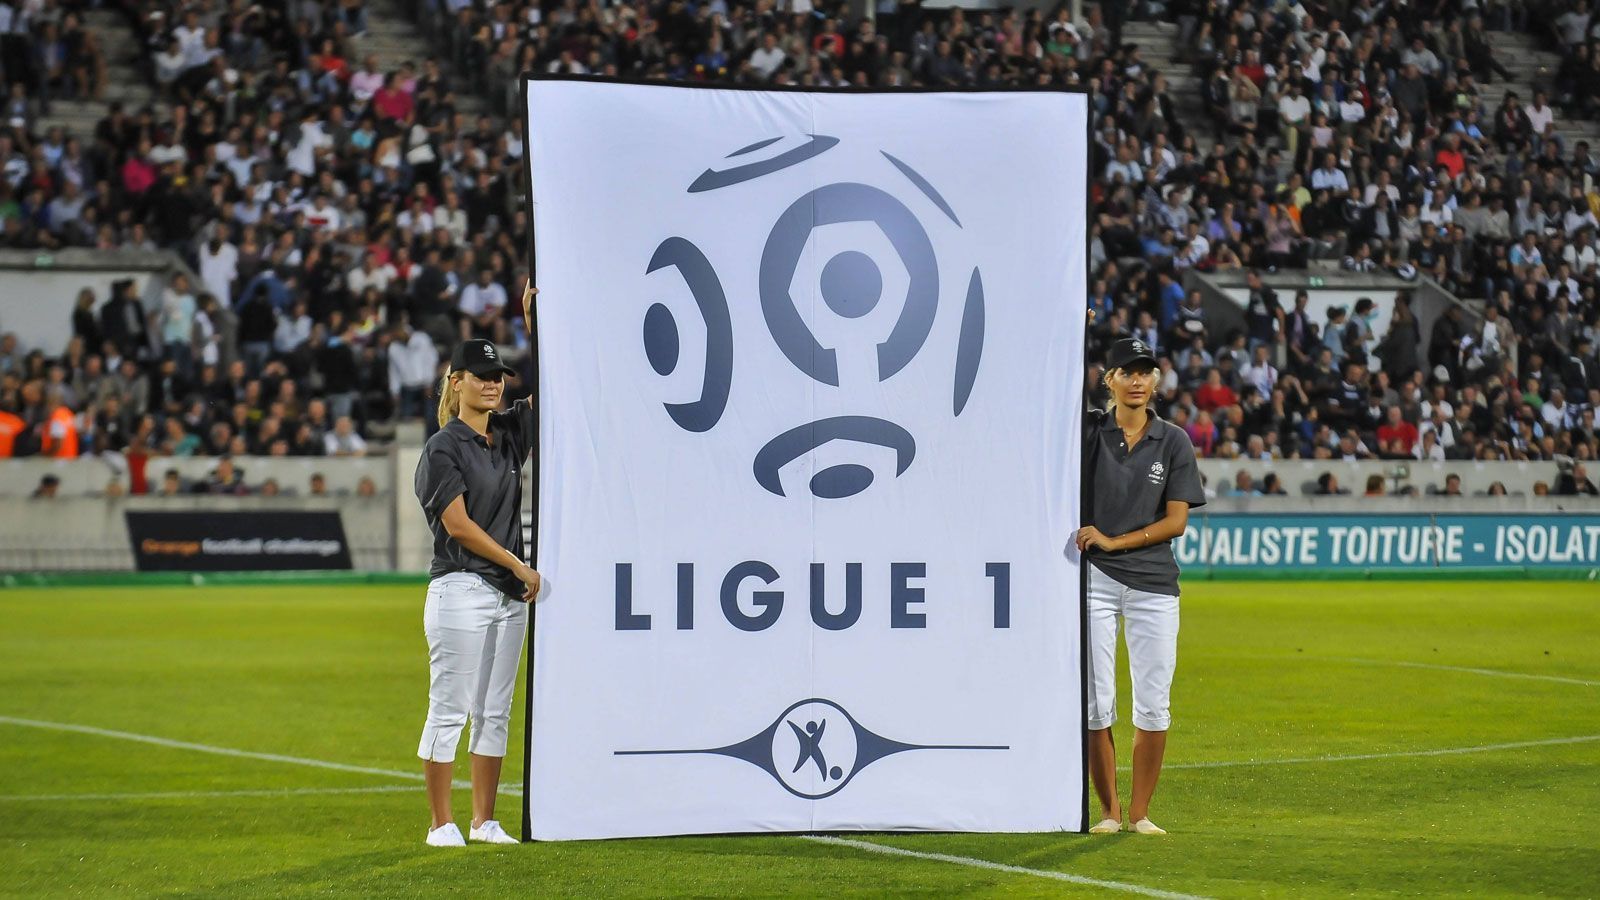 
                <strong>Ligue 1 (Frankreich)</strong><br>
                31. August, 23.59 Uhr
              